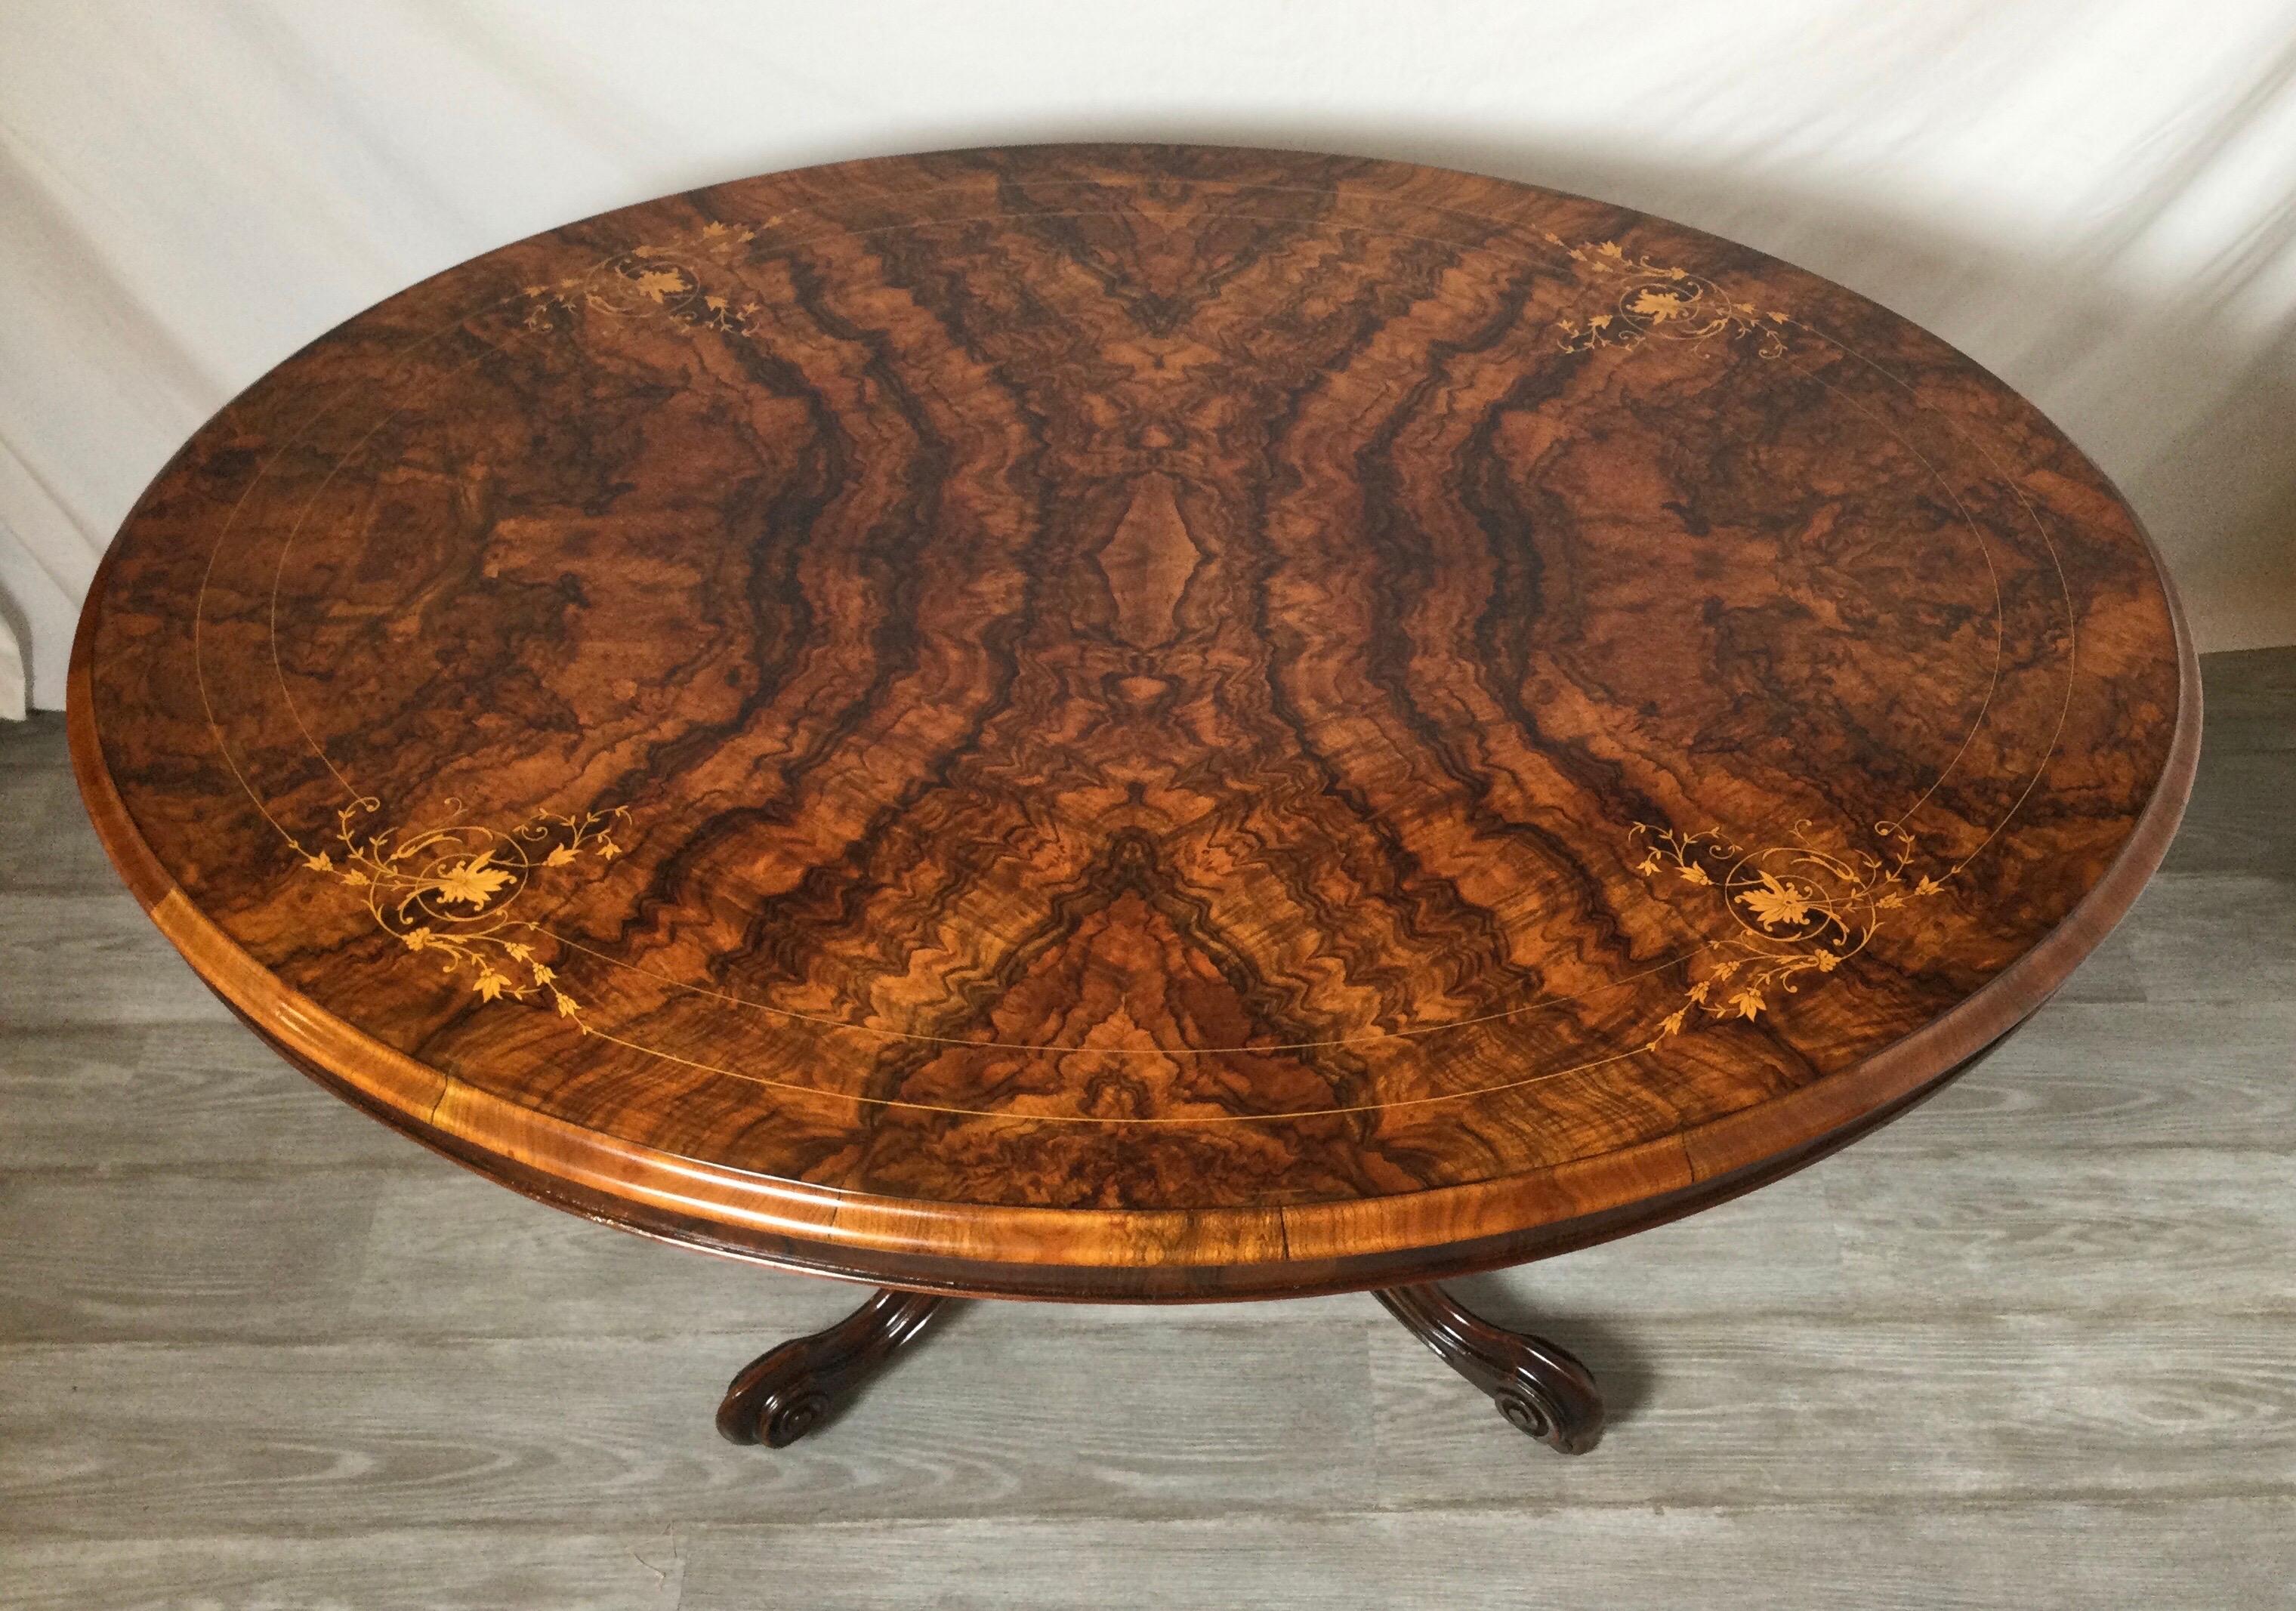 An oval walnut breakfast table with hand carved pedestal base. The highly figural burl walnut with inlay of satin wood. The top tilts to allow easy moving around and storage.